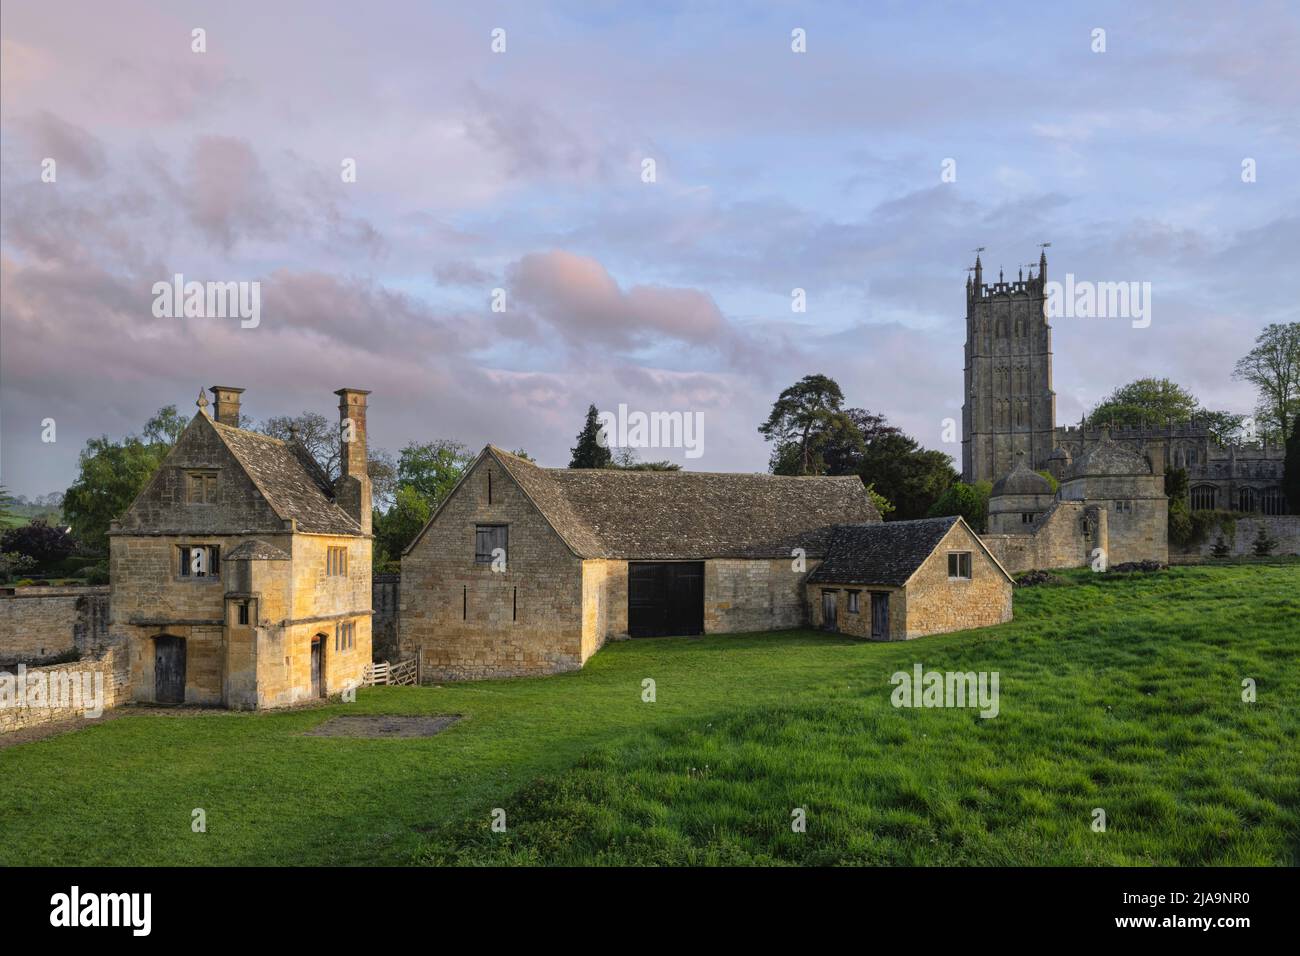 Kirche und Banketthaus in Chipping Campden, Cotswolds, England. Stockfoto